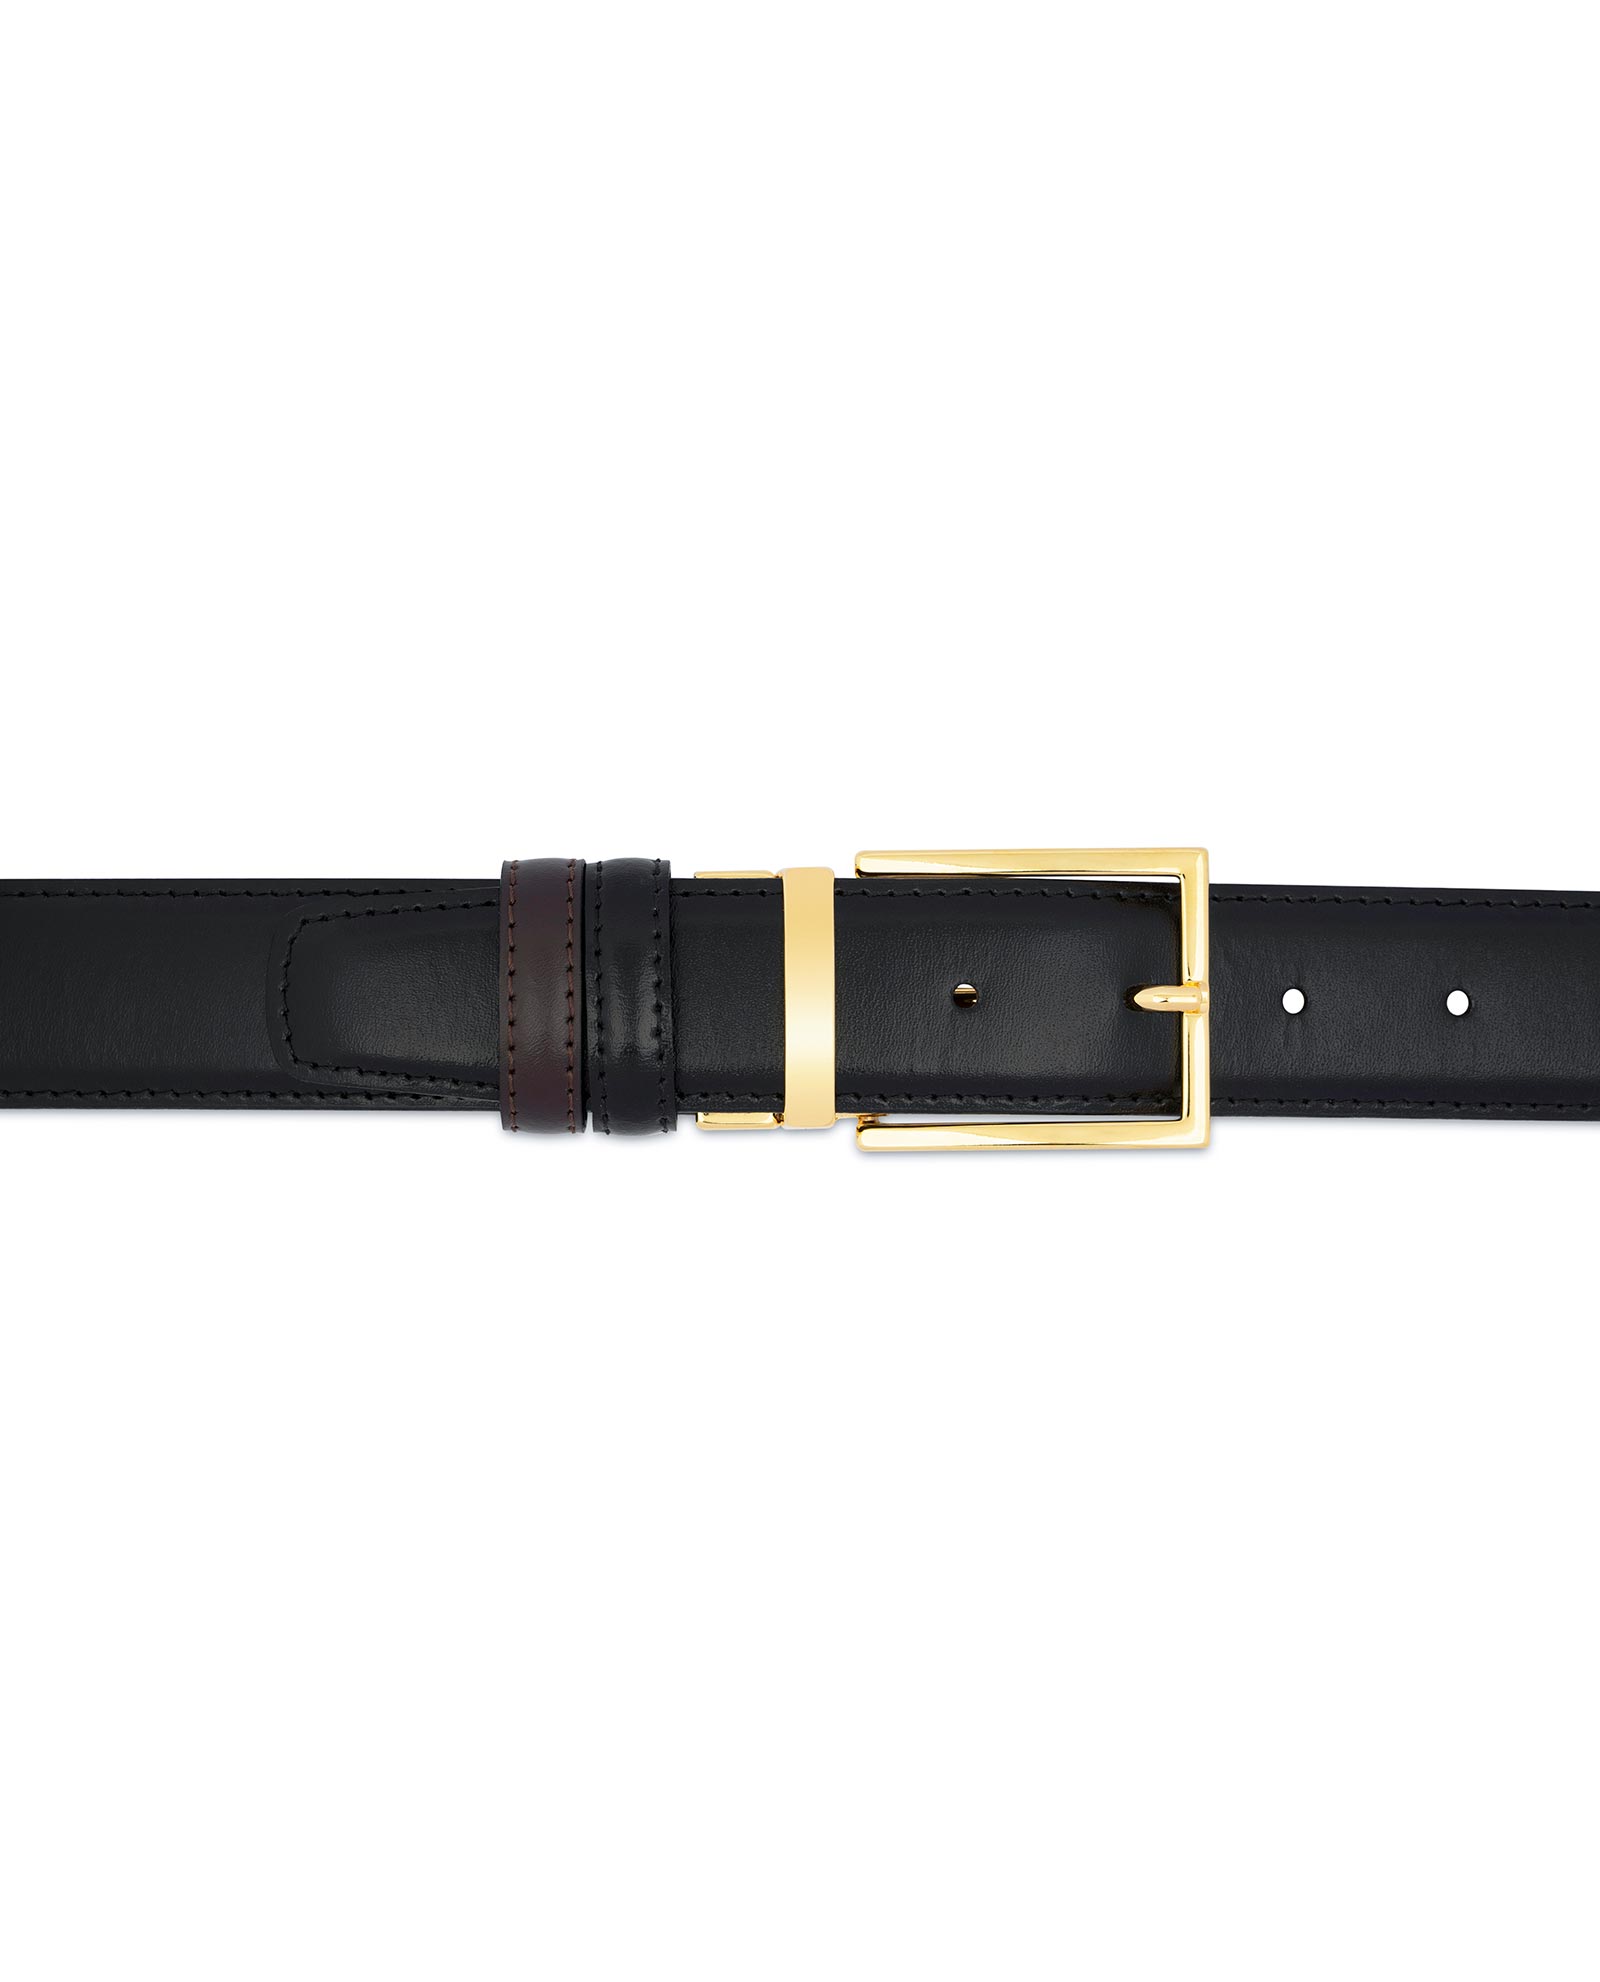 Black Genuine Leather Mens Belts Luxury Gold Automatic Buckles